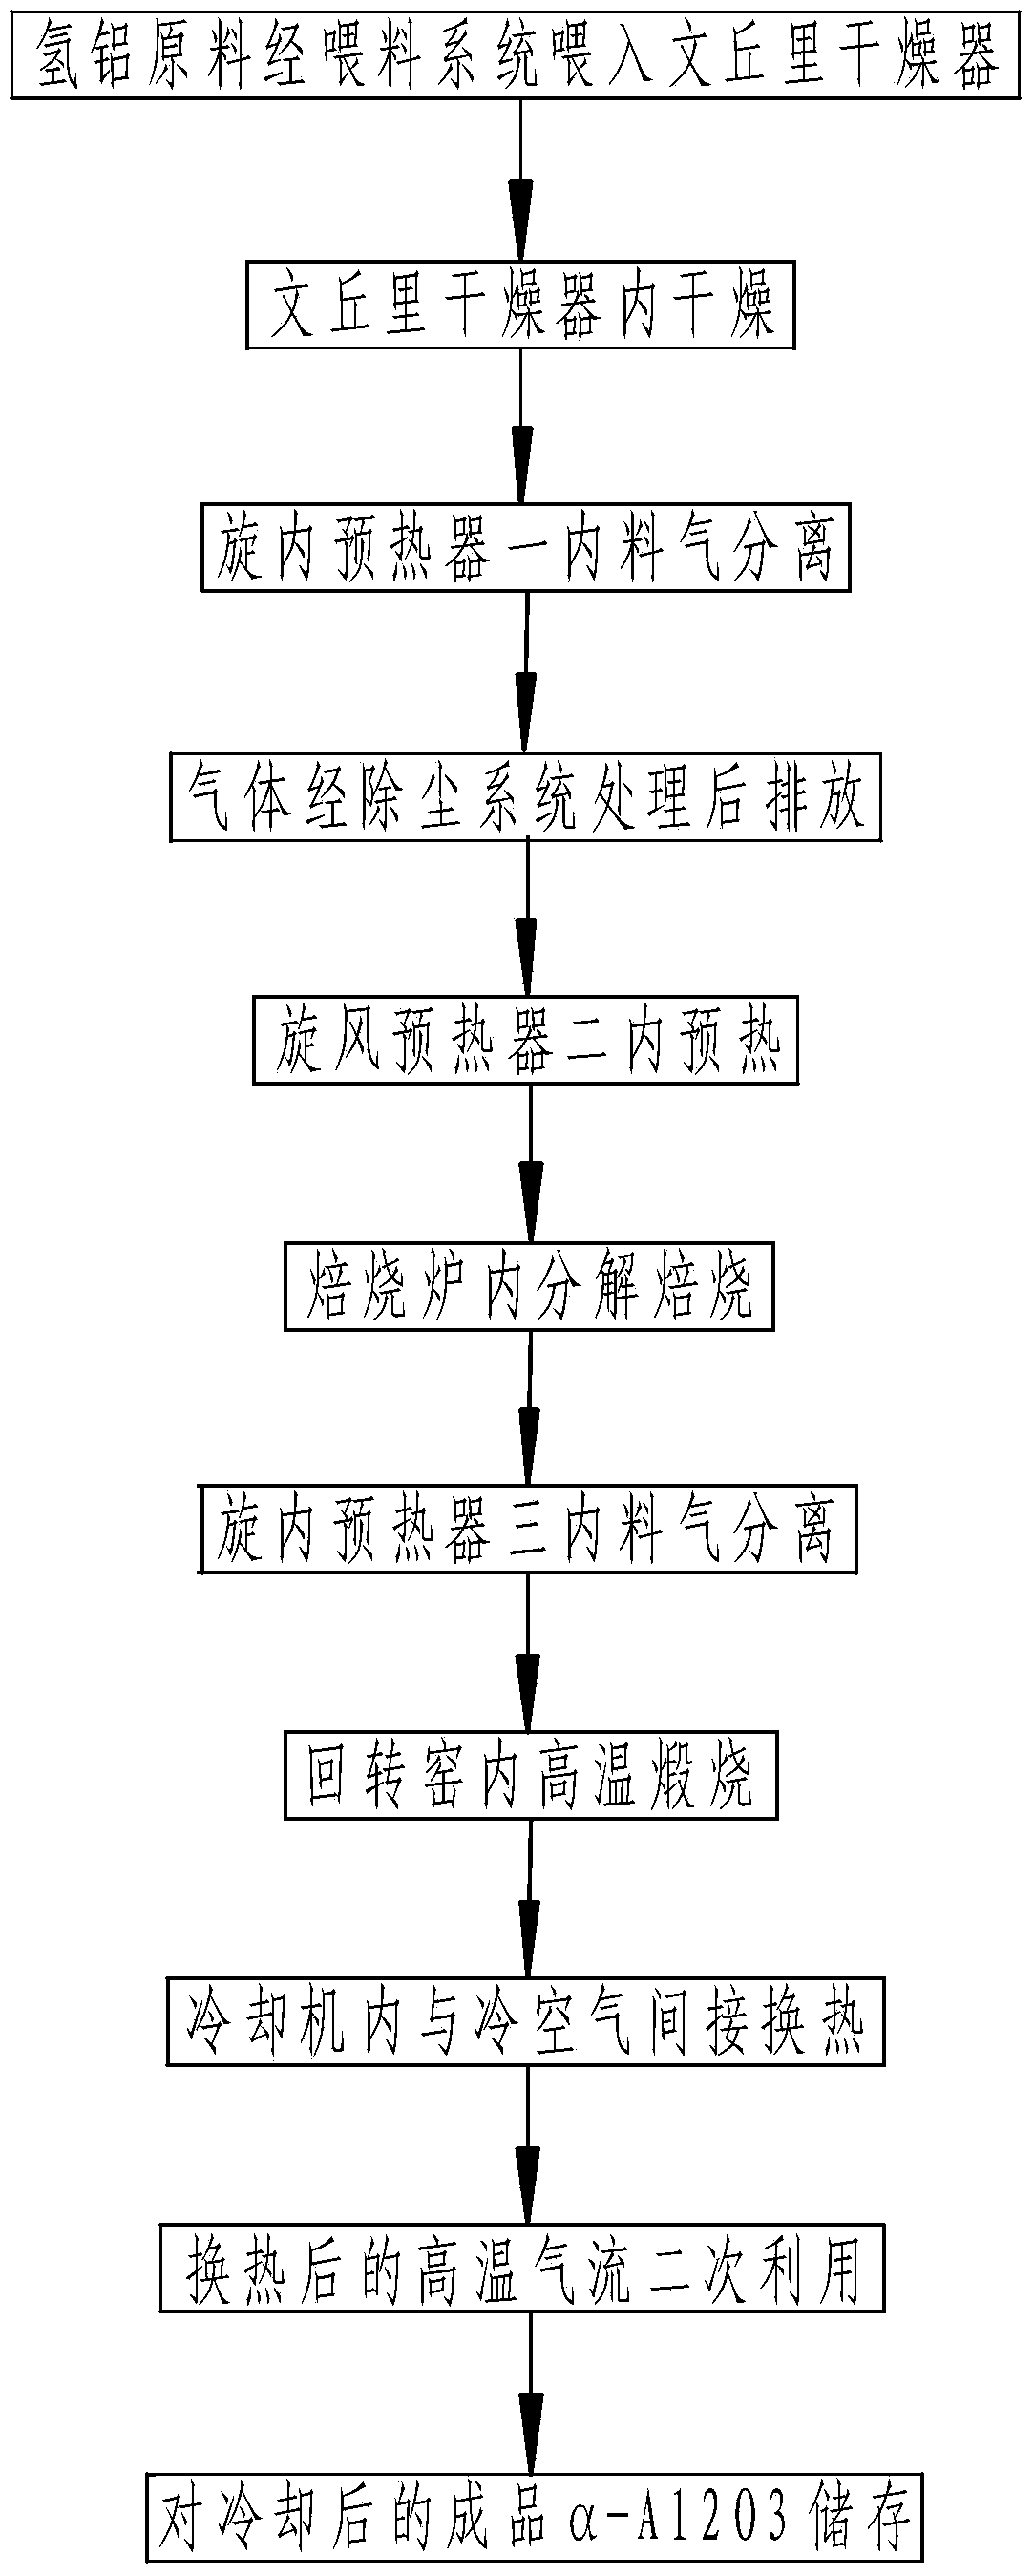 Method for producing alpha-Al2O3 by employing predecomposition technology and taking aluminium hydrogen as raw material